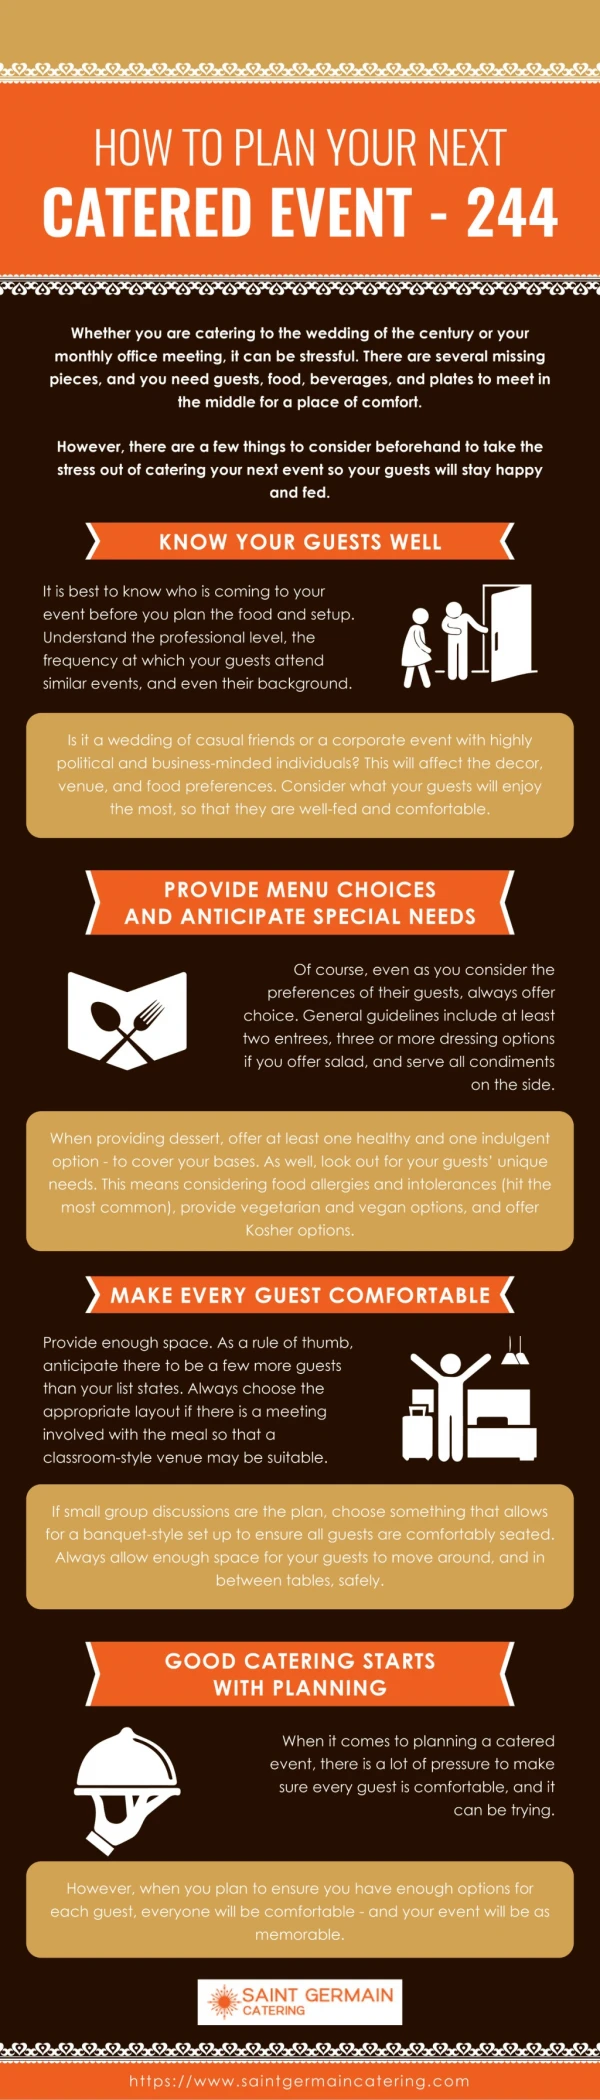 How to Plan Your Next Catered Event - 244